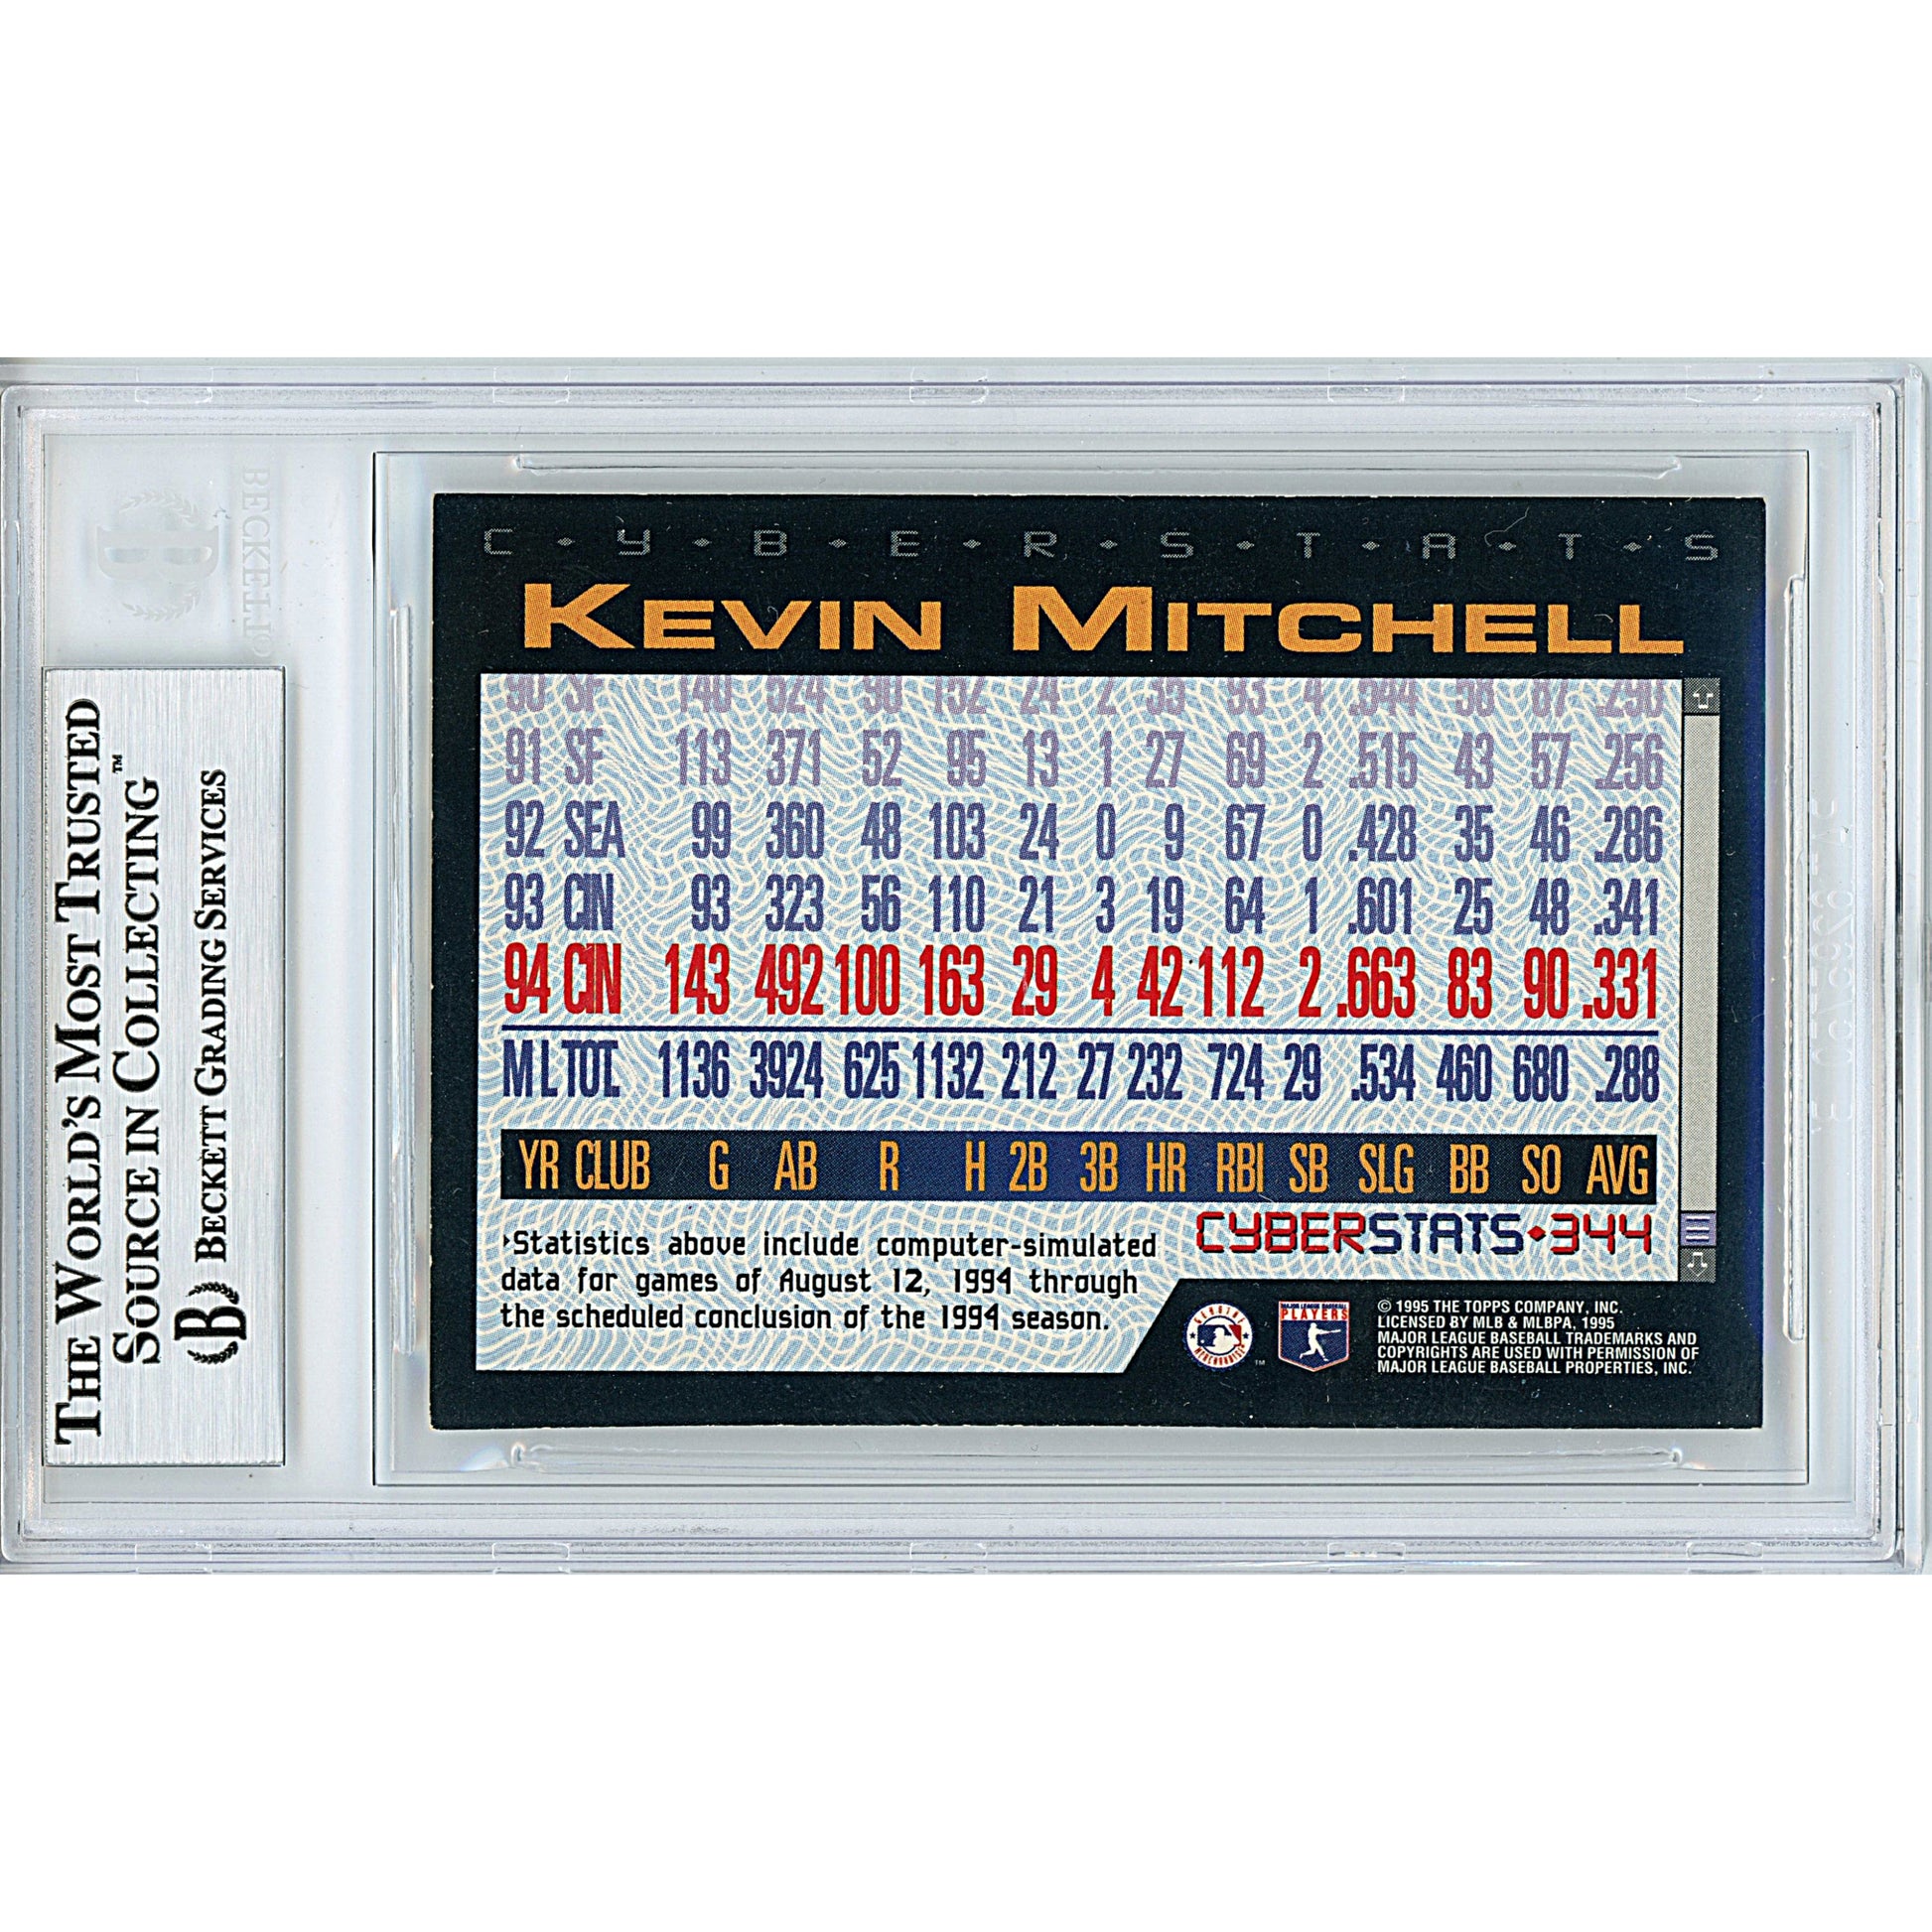 Kevin Mitchell autographed baseball card (San Francisco Giants SD